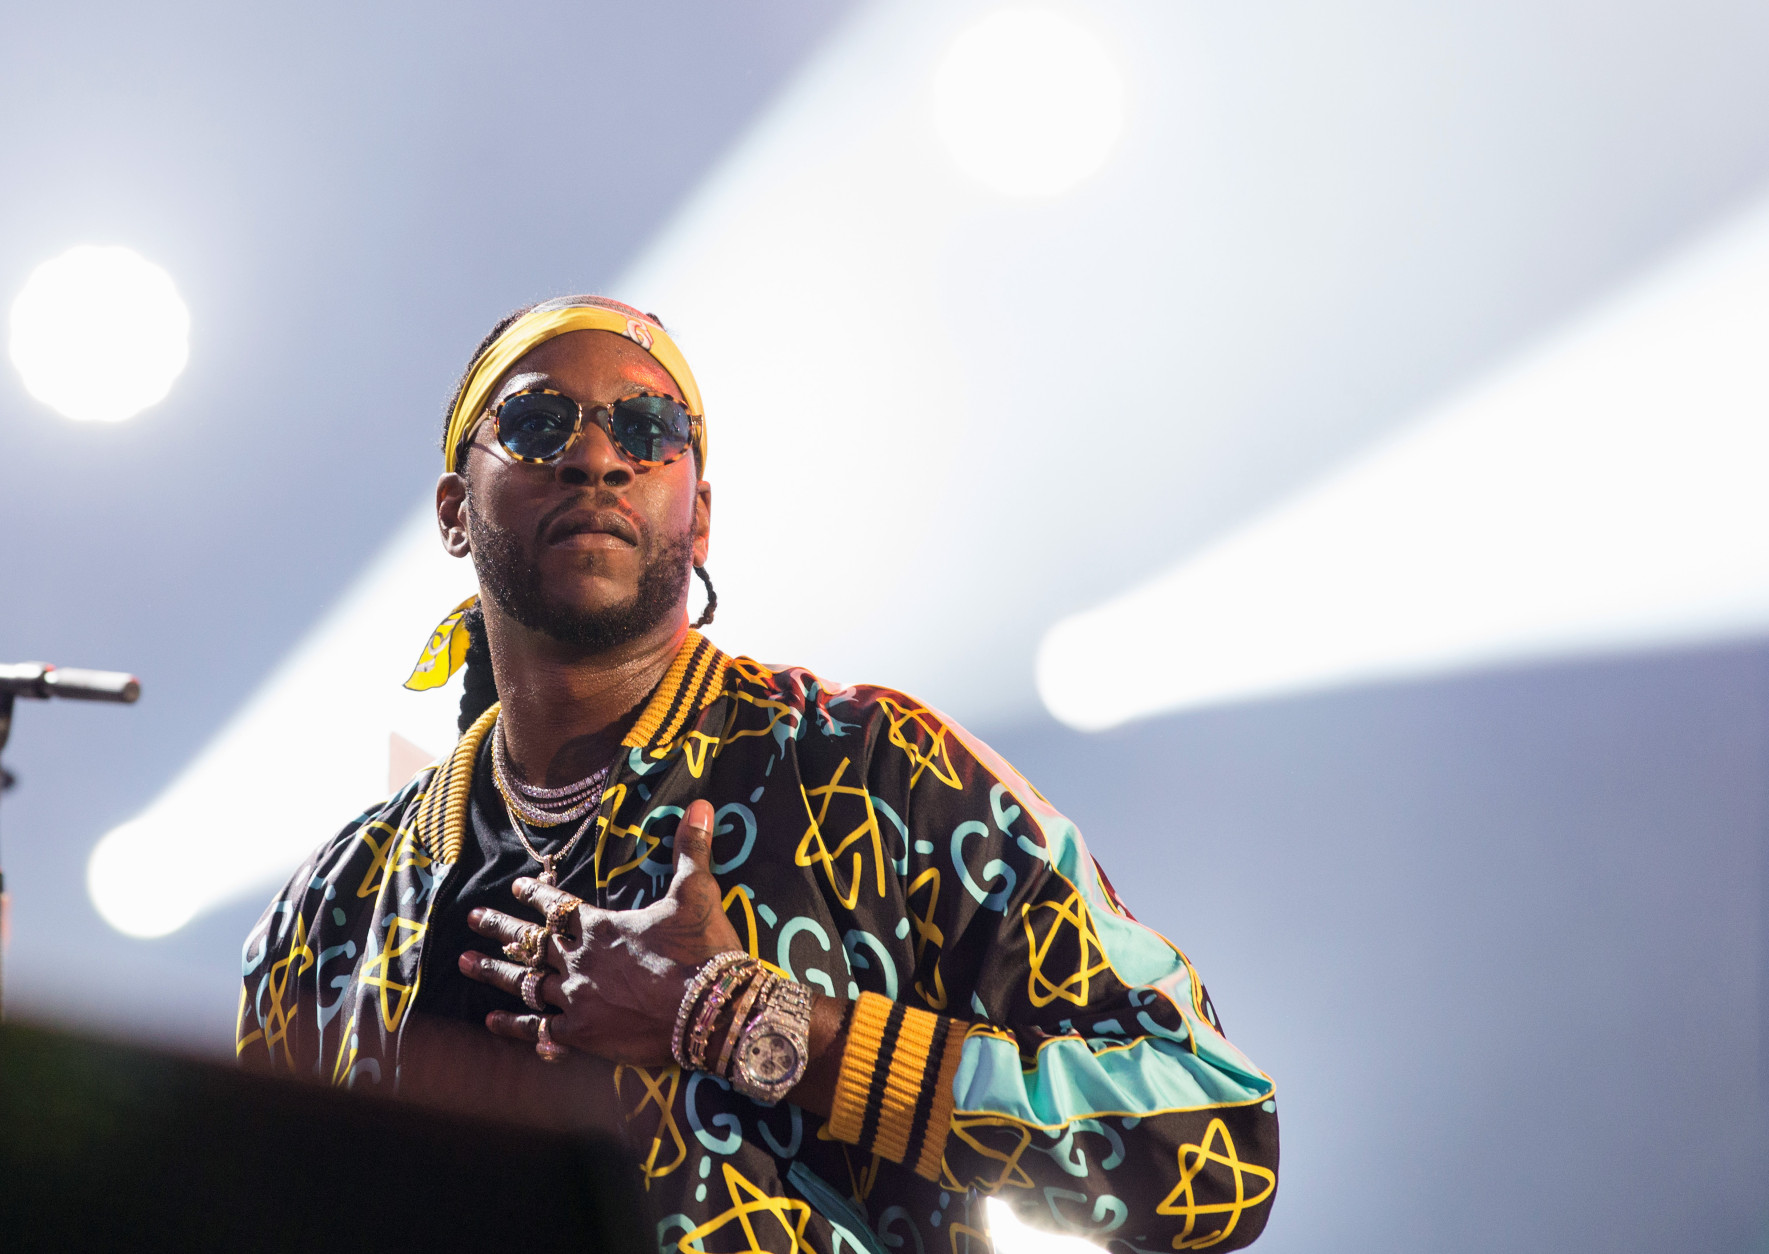 2 Chainz performs at The Budweiser Made In America Festival on Saturday, Sept. 3, 2016, in Philadelphia. (Photo by Michael Zorn/Invision/AP)